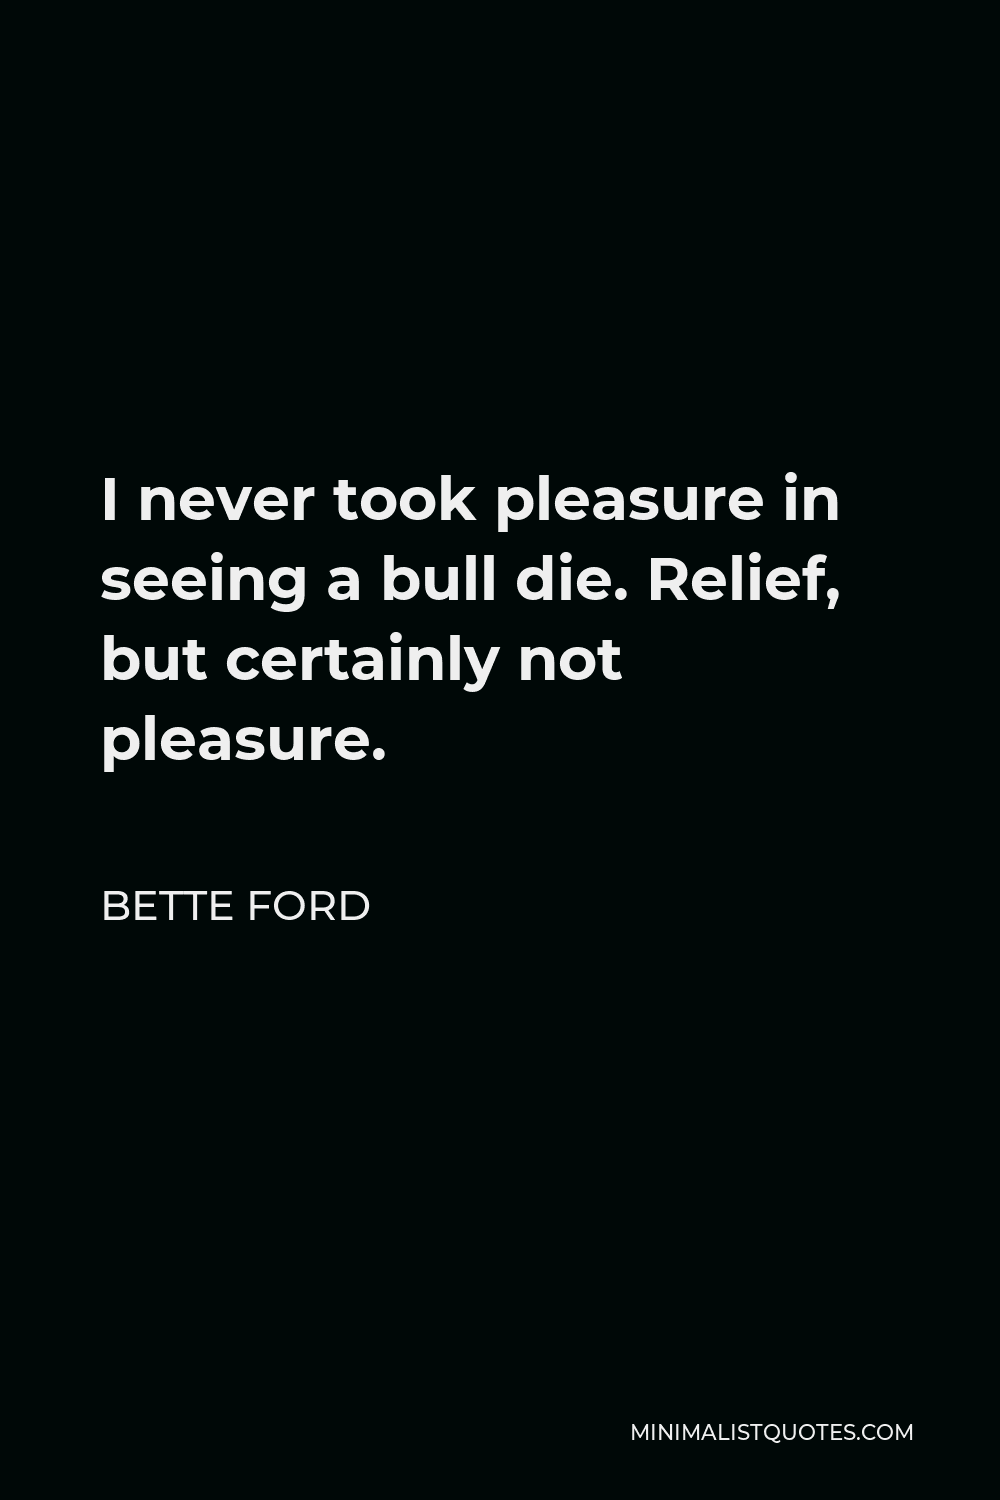 Bette Ford Quote - I never took pleasure in seeing a bull die. Relief, but certainly not pleasure.